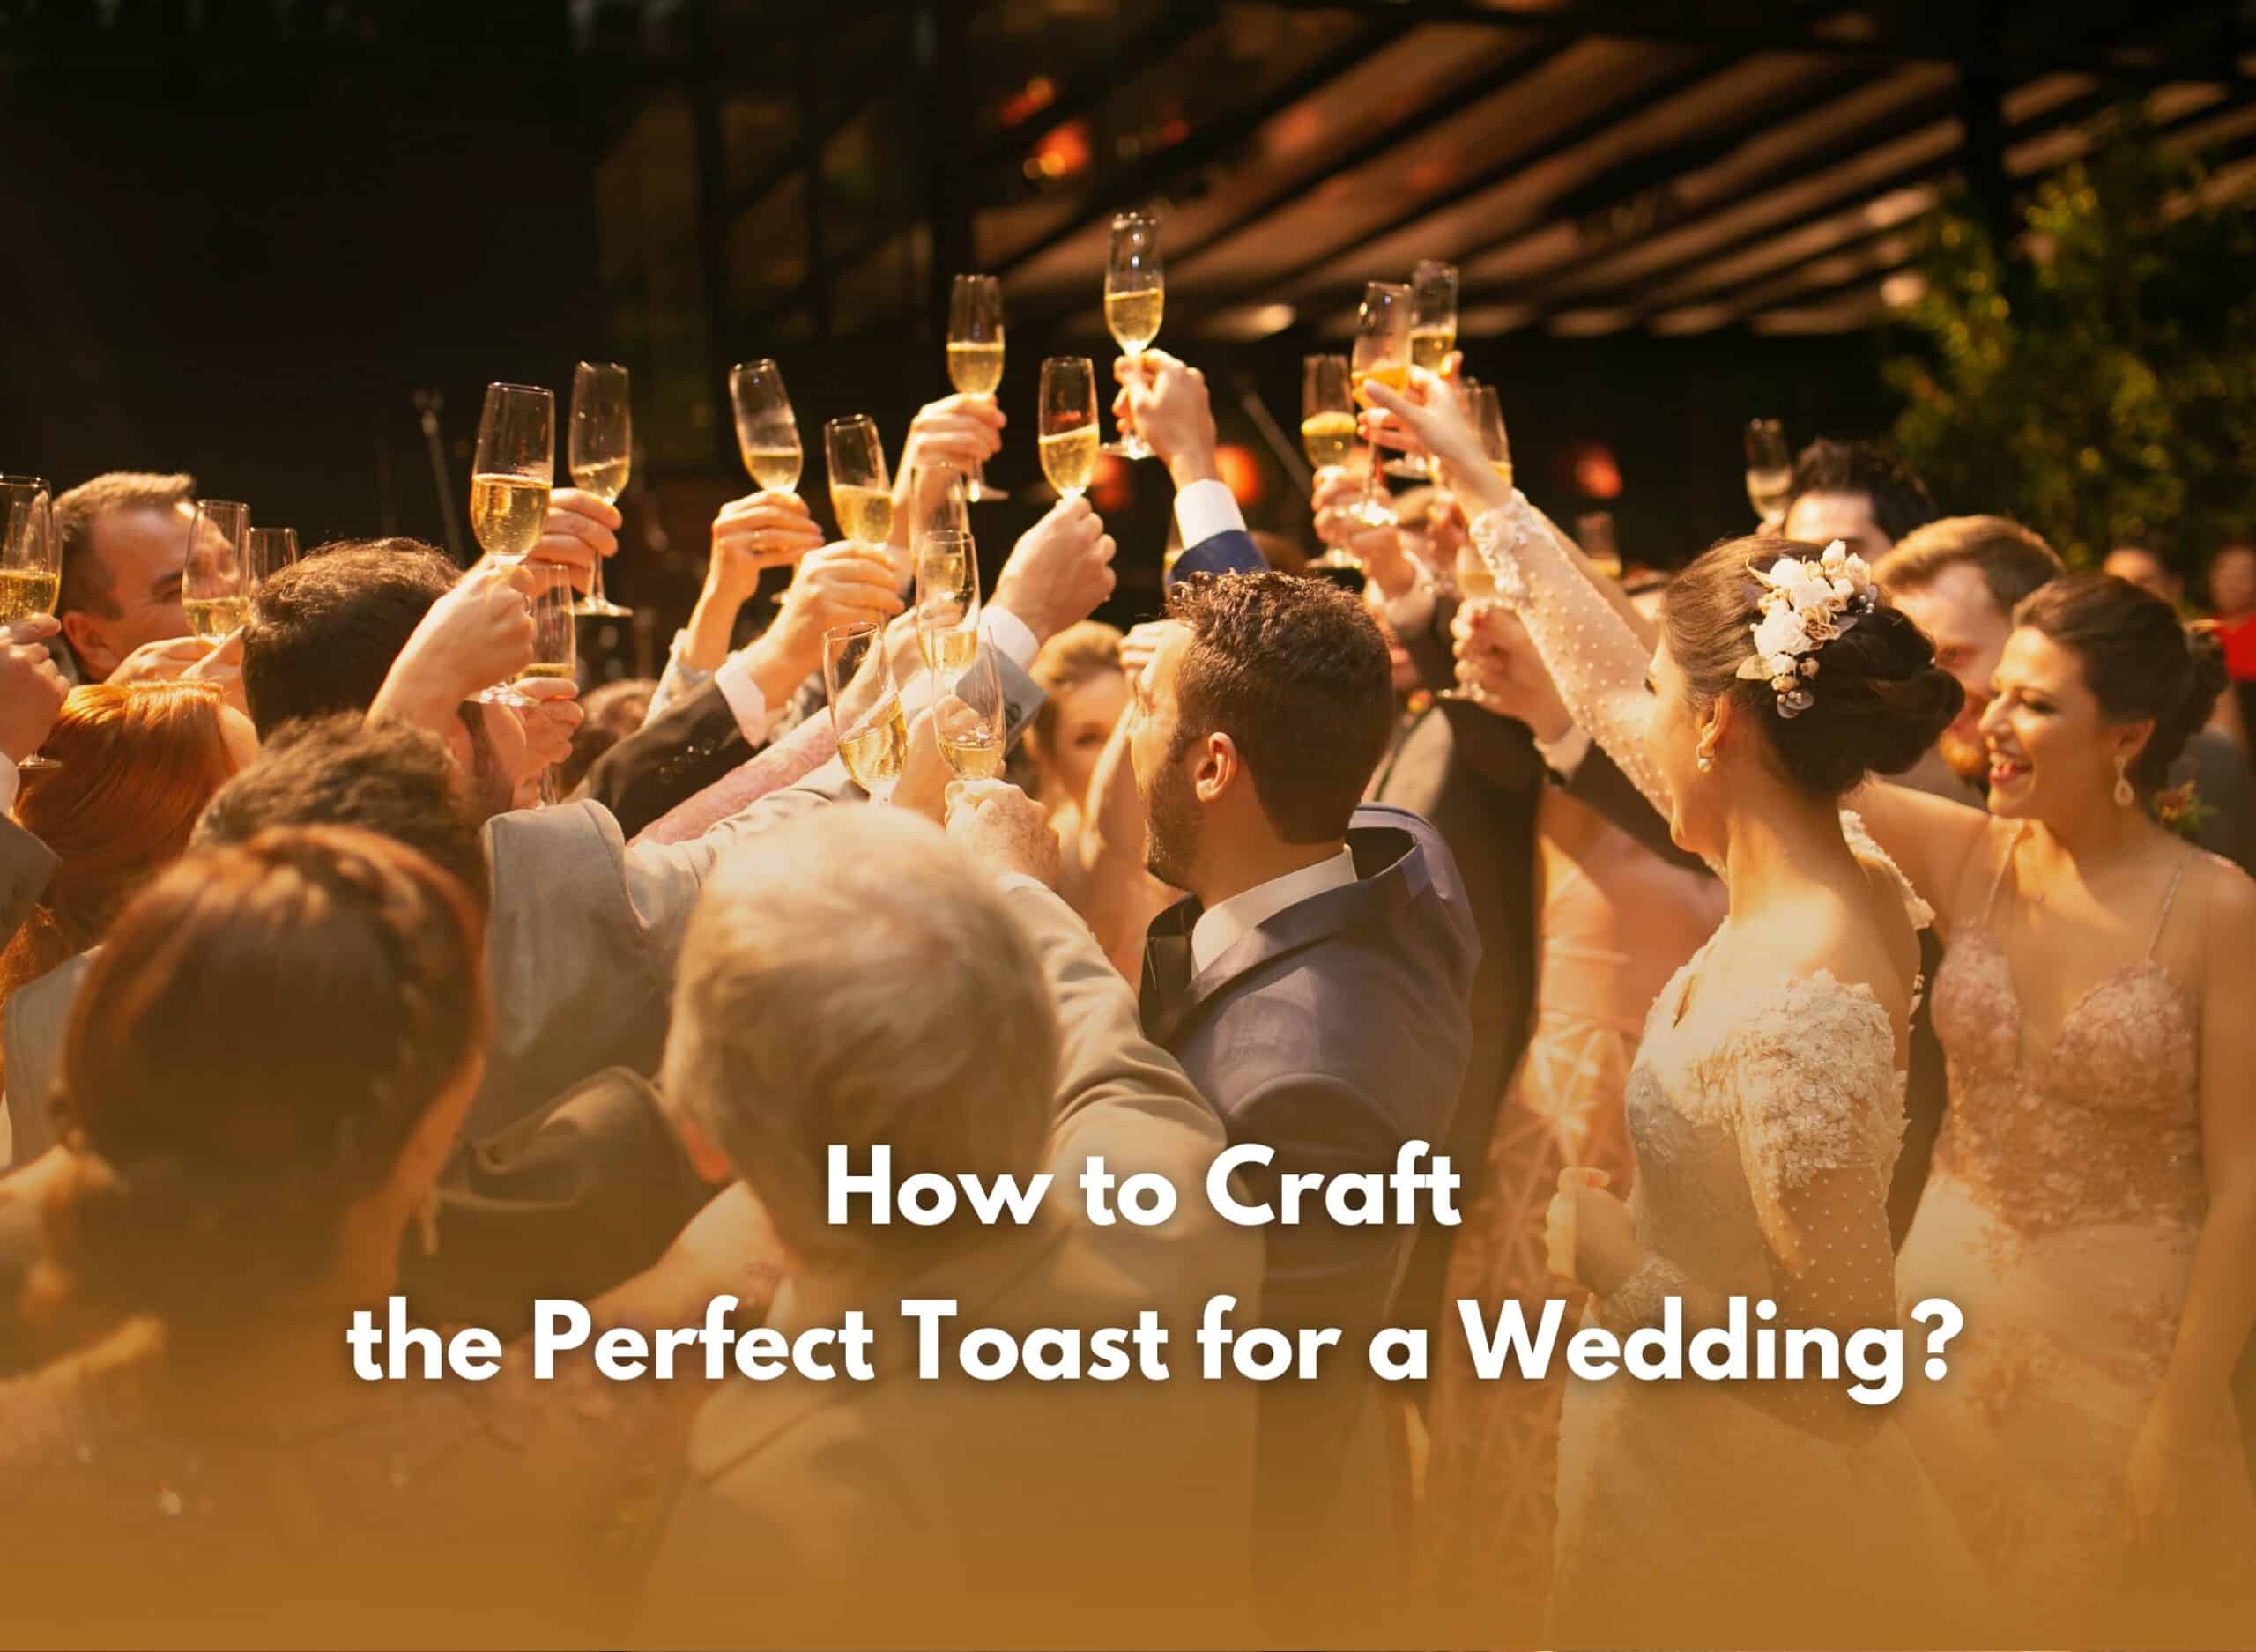 How To Craft The Perfect Toast For A Wedding Scaled - Toast For A Wedding | Cubebik Blog